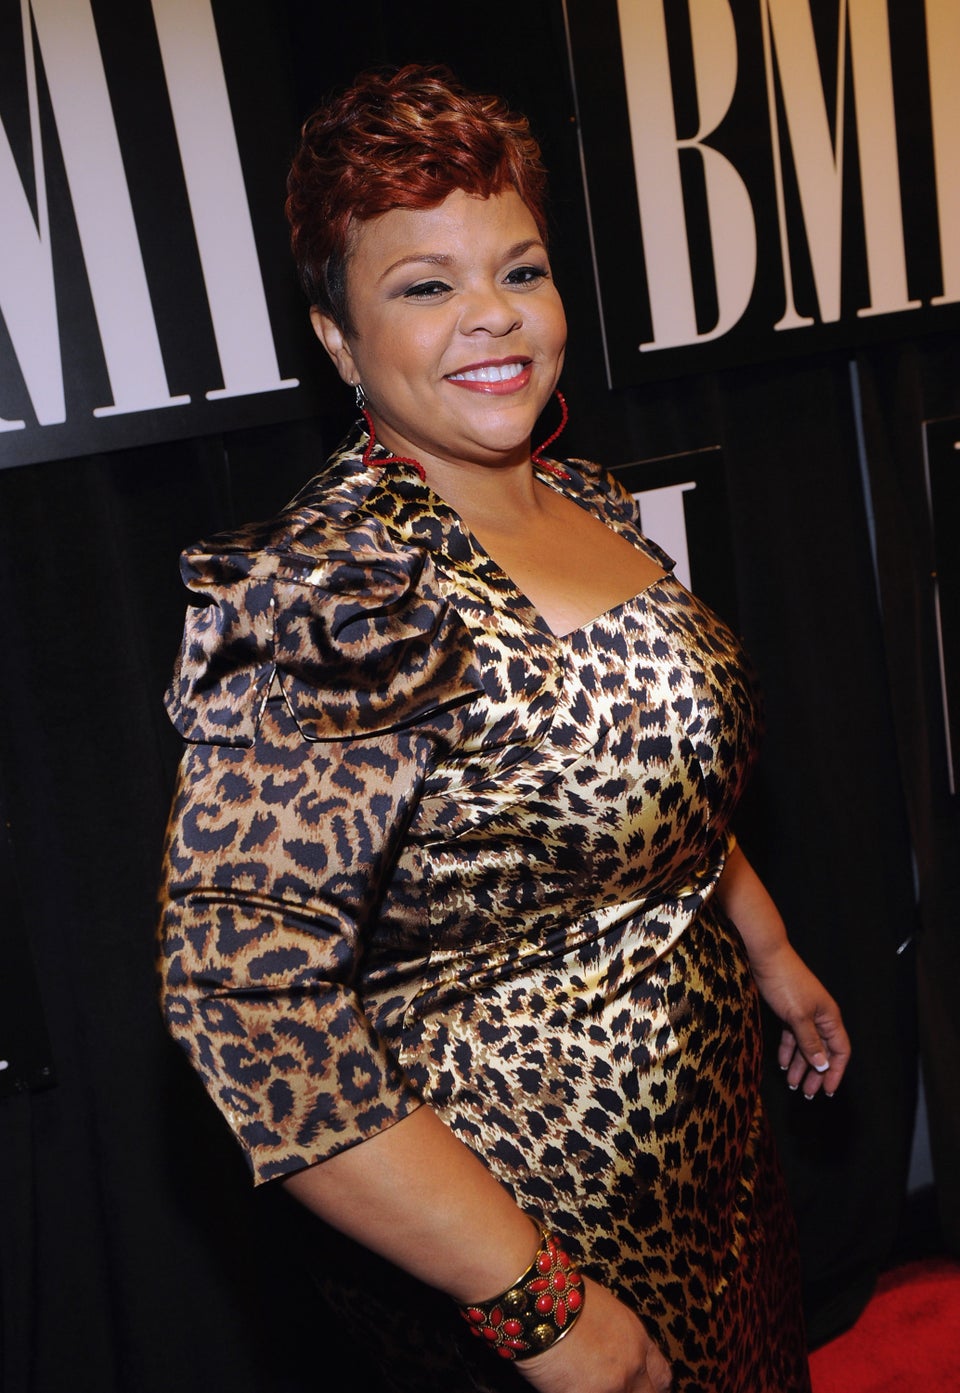 Tamela Mann on Her Latest Album, Weight-Loss, and Working with Whitney in ‘Sparkle’